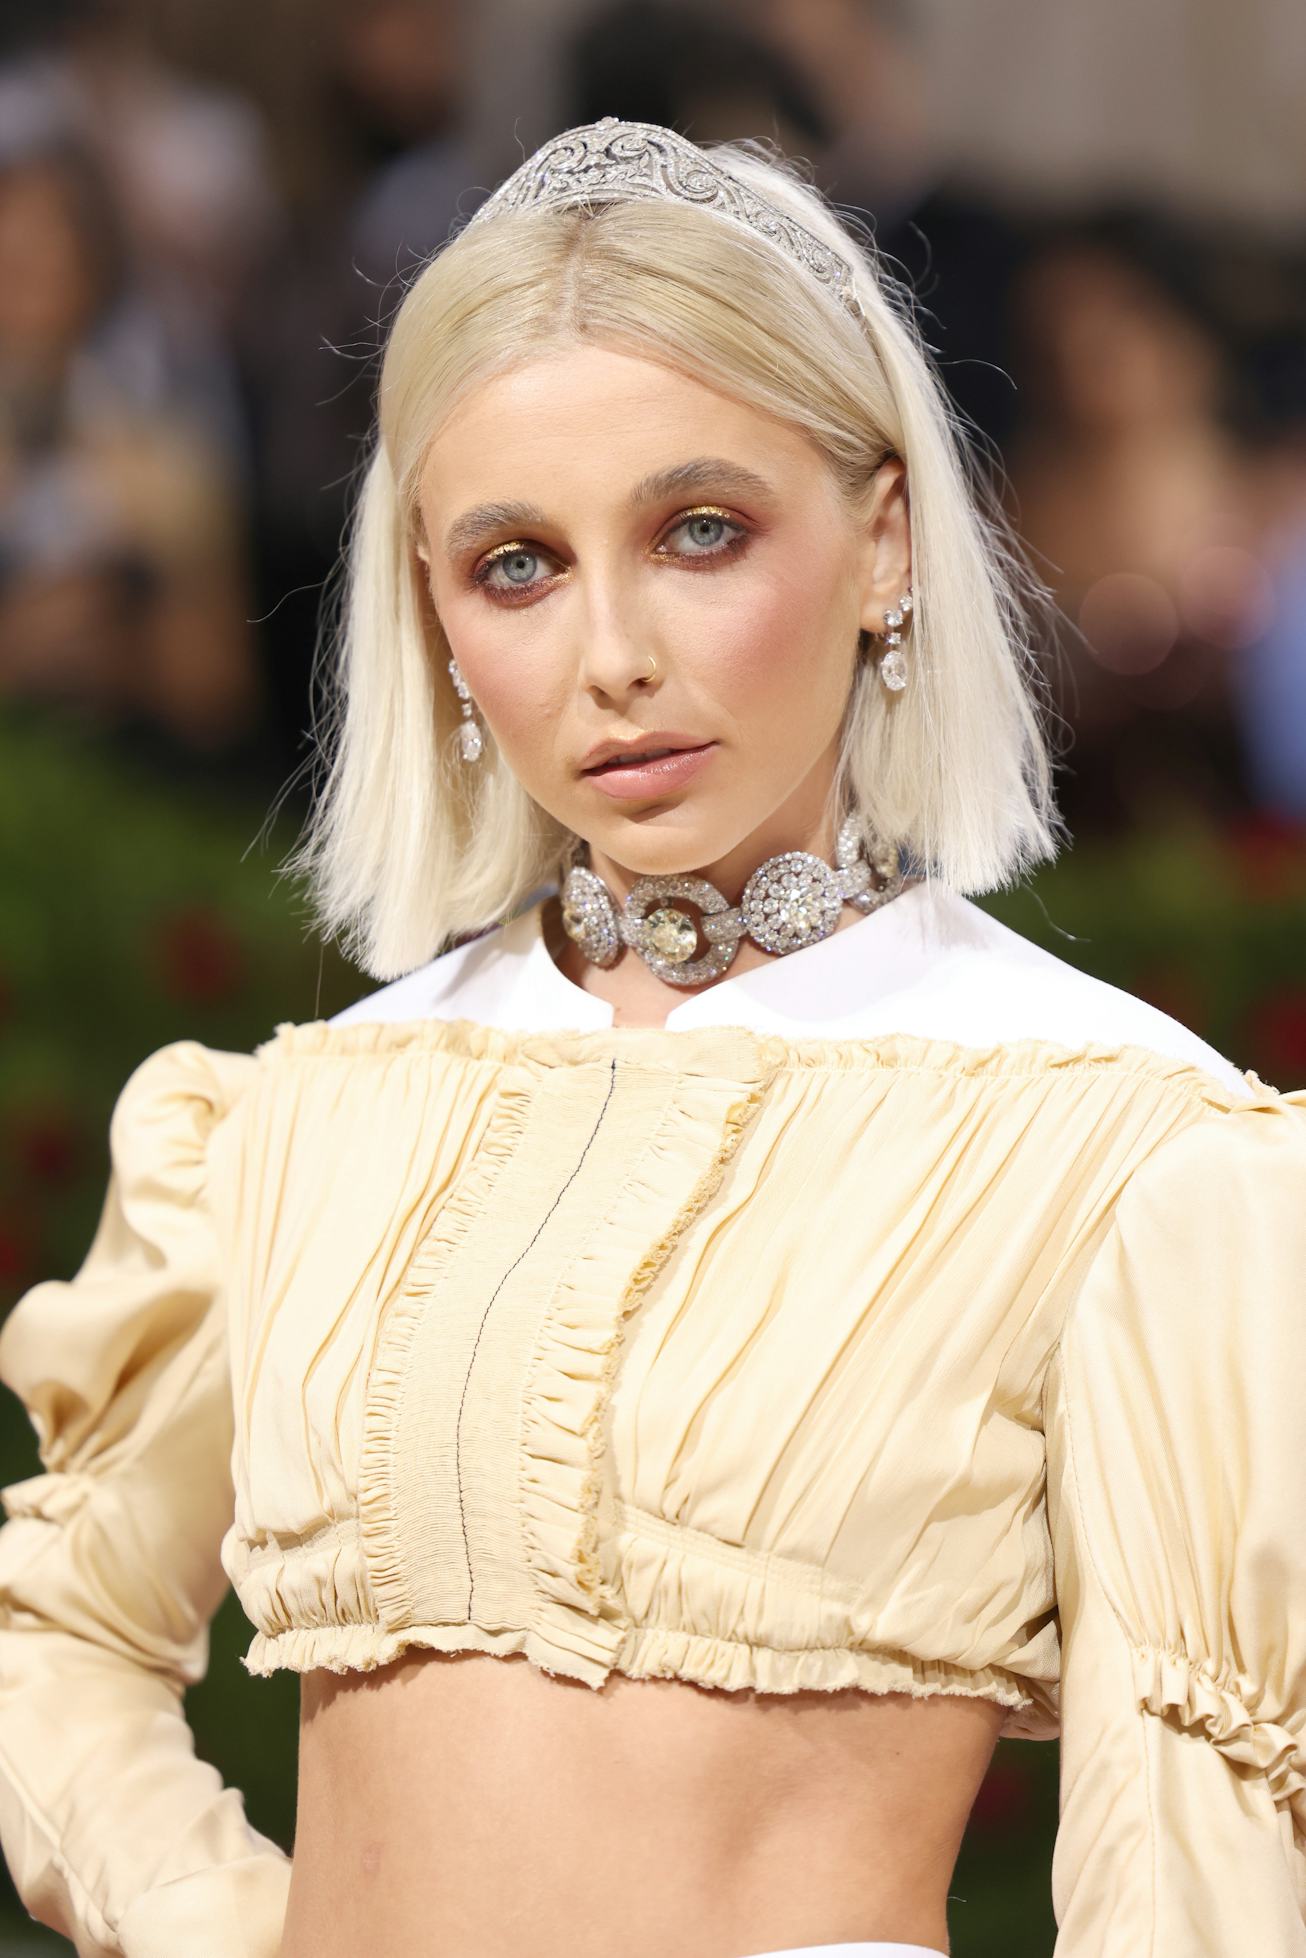 Emma Chamberlain wore a nose piercing to the 2022 Met Gala